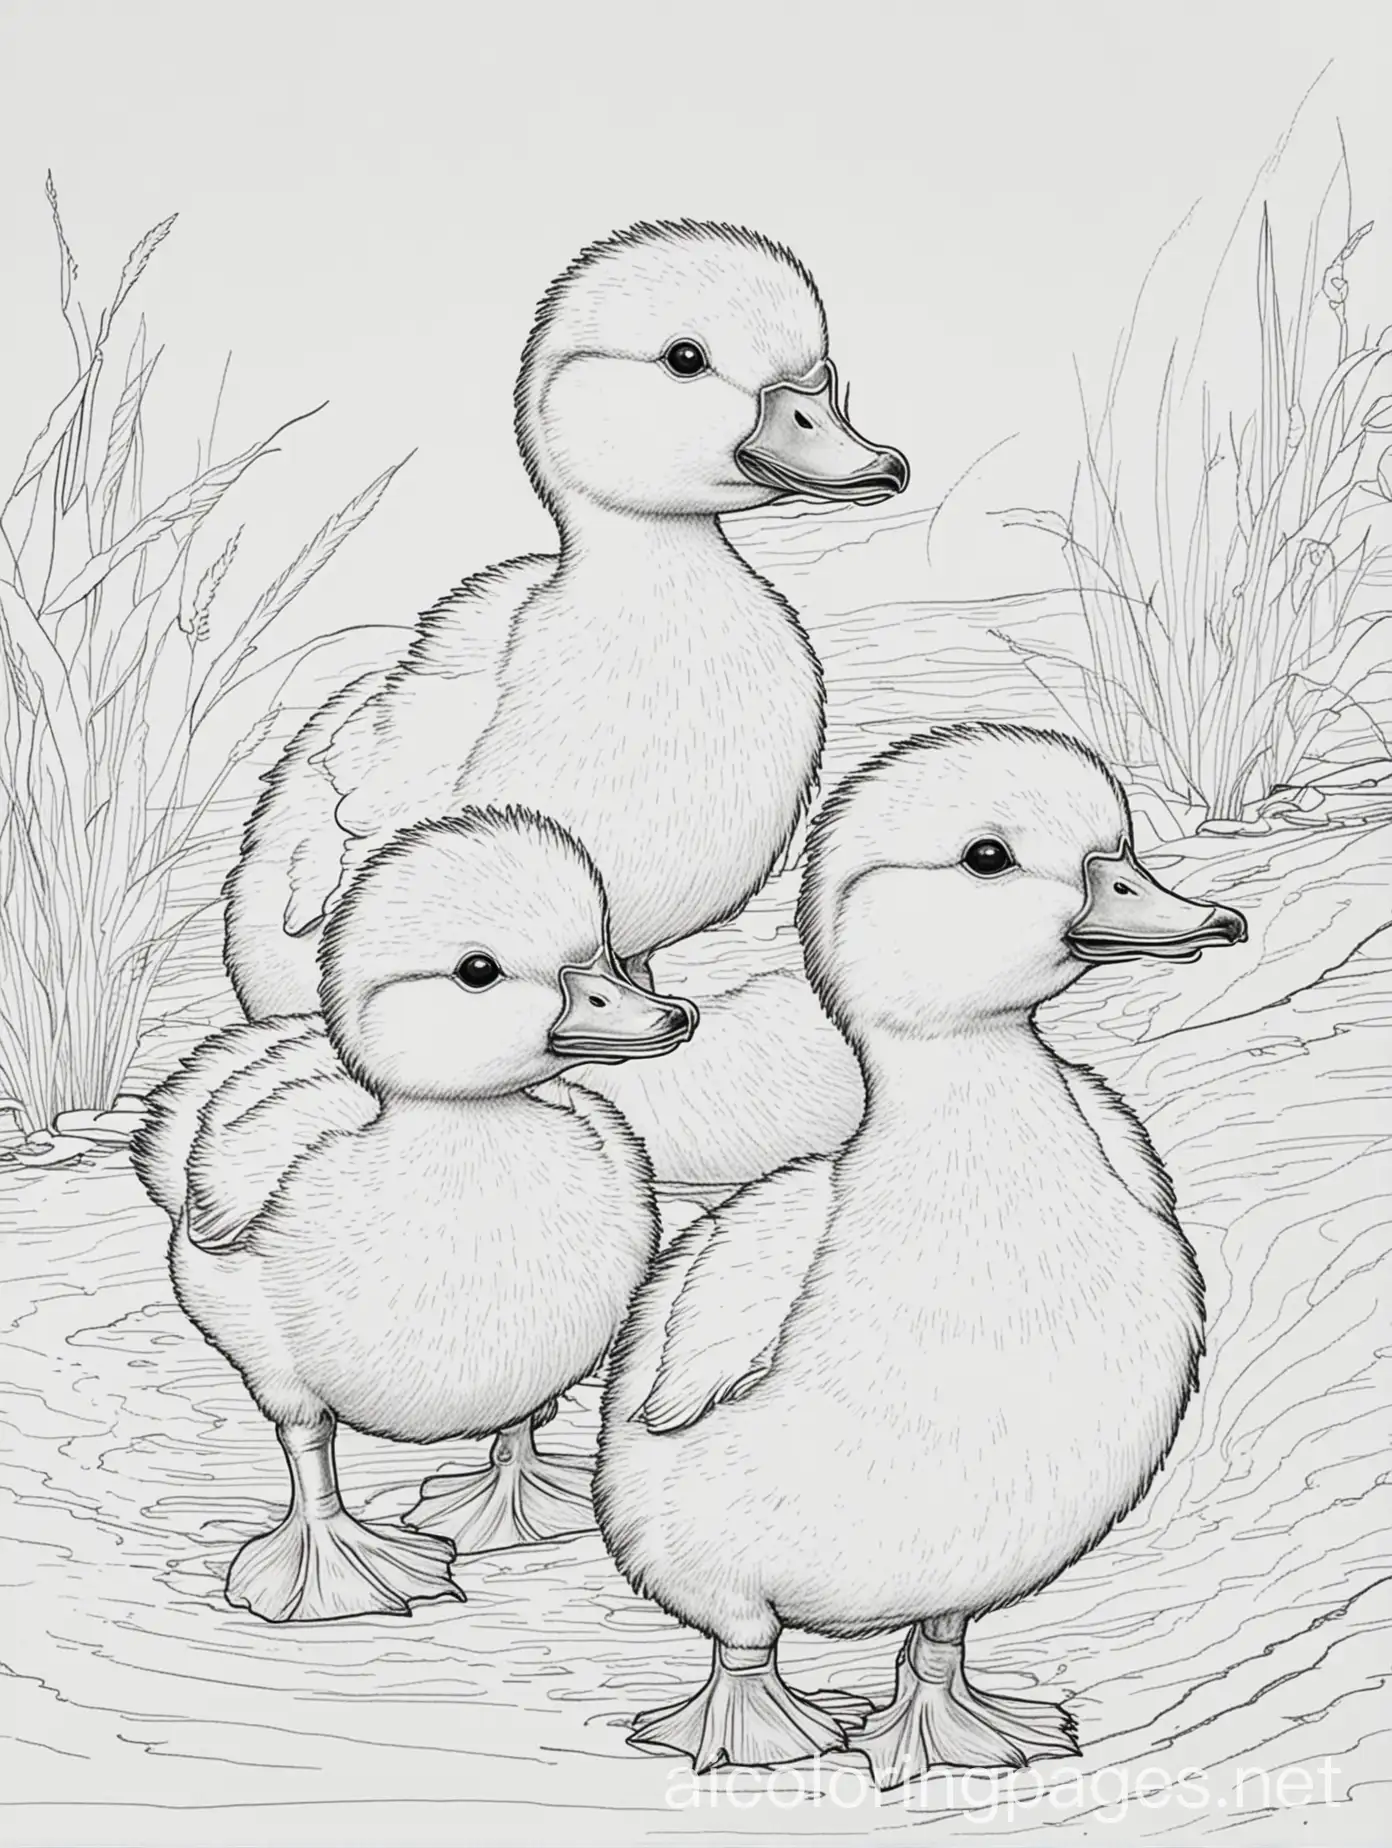 Happy ducklings , Coloring Page, black and white, line art, white background, Simplicity, Ample White Space. The background of the coloring page is plain white to make it easy for young children to color within the lines. The outlines of all the subjects are easy to distinguish, making it simple for kids to color without too much difficulty